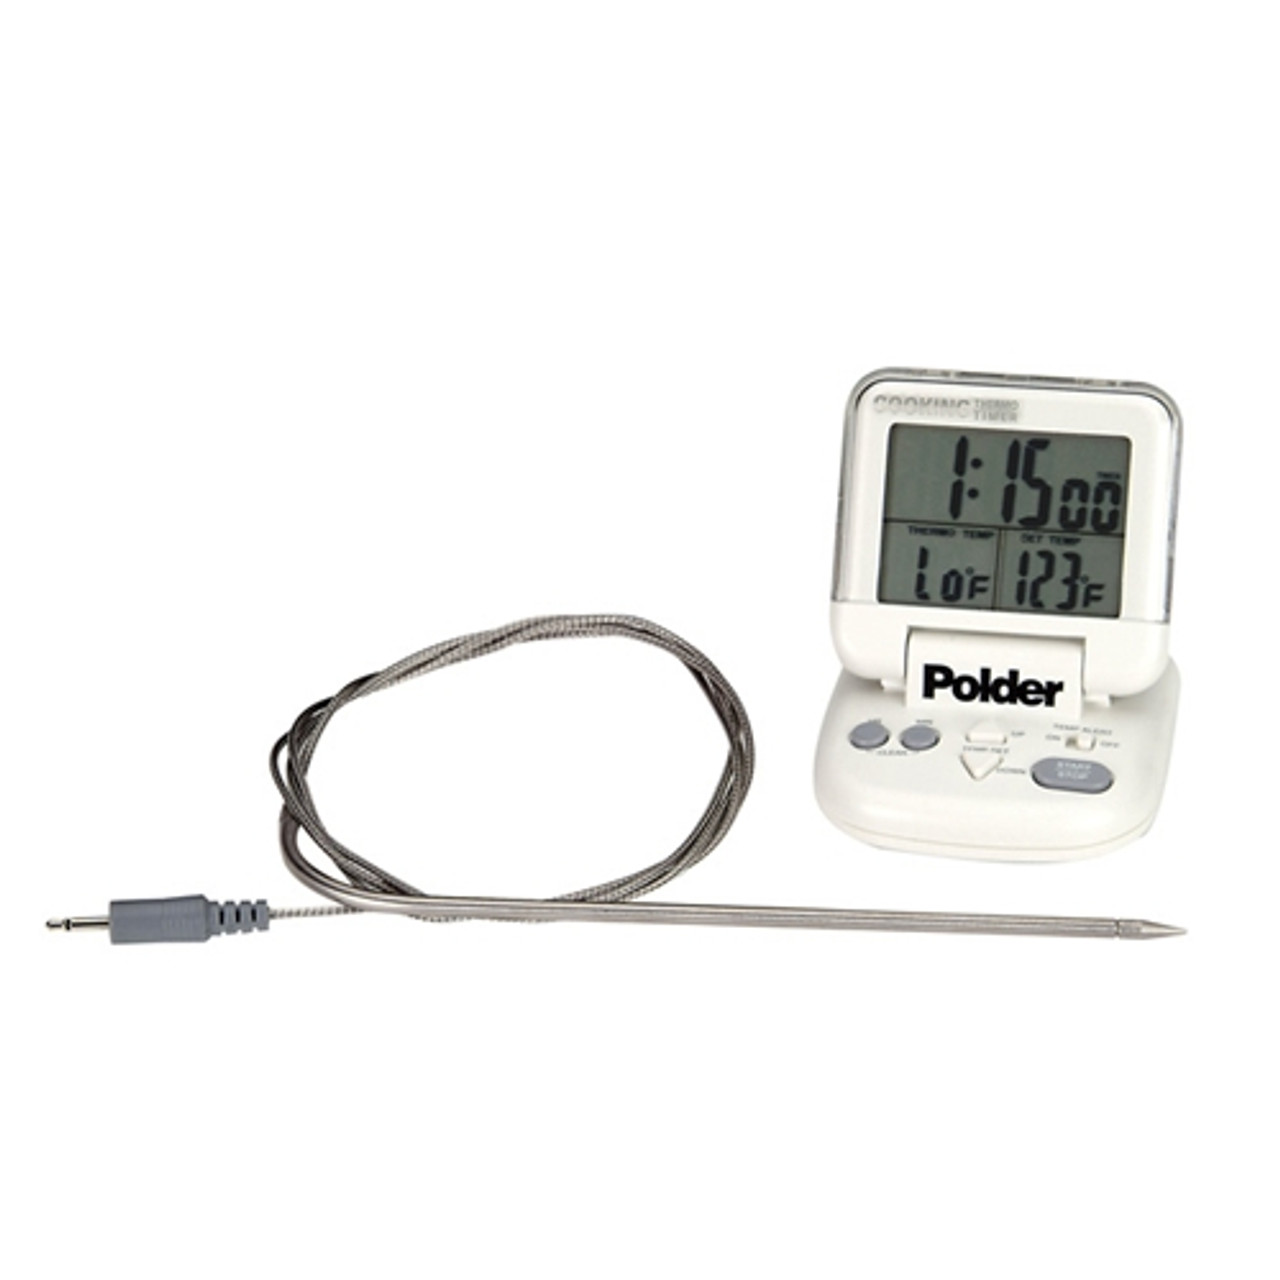 2-Channel Dual Mini Handheld Digital Thermocouple Pyrometer Thermometer  Display